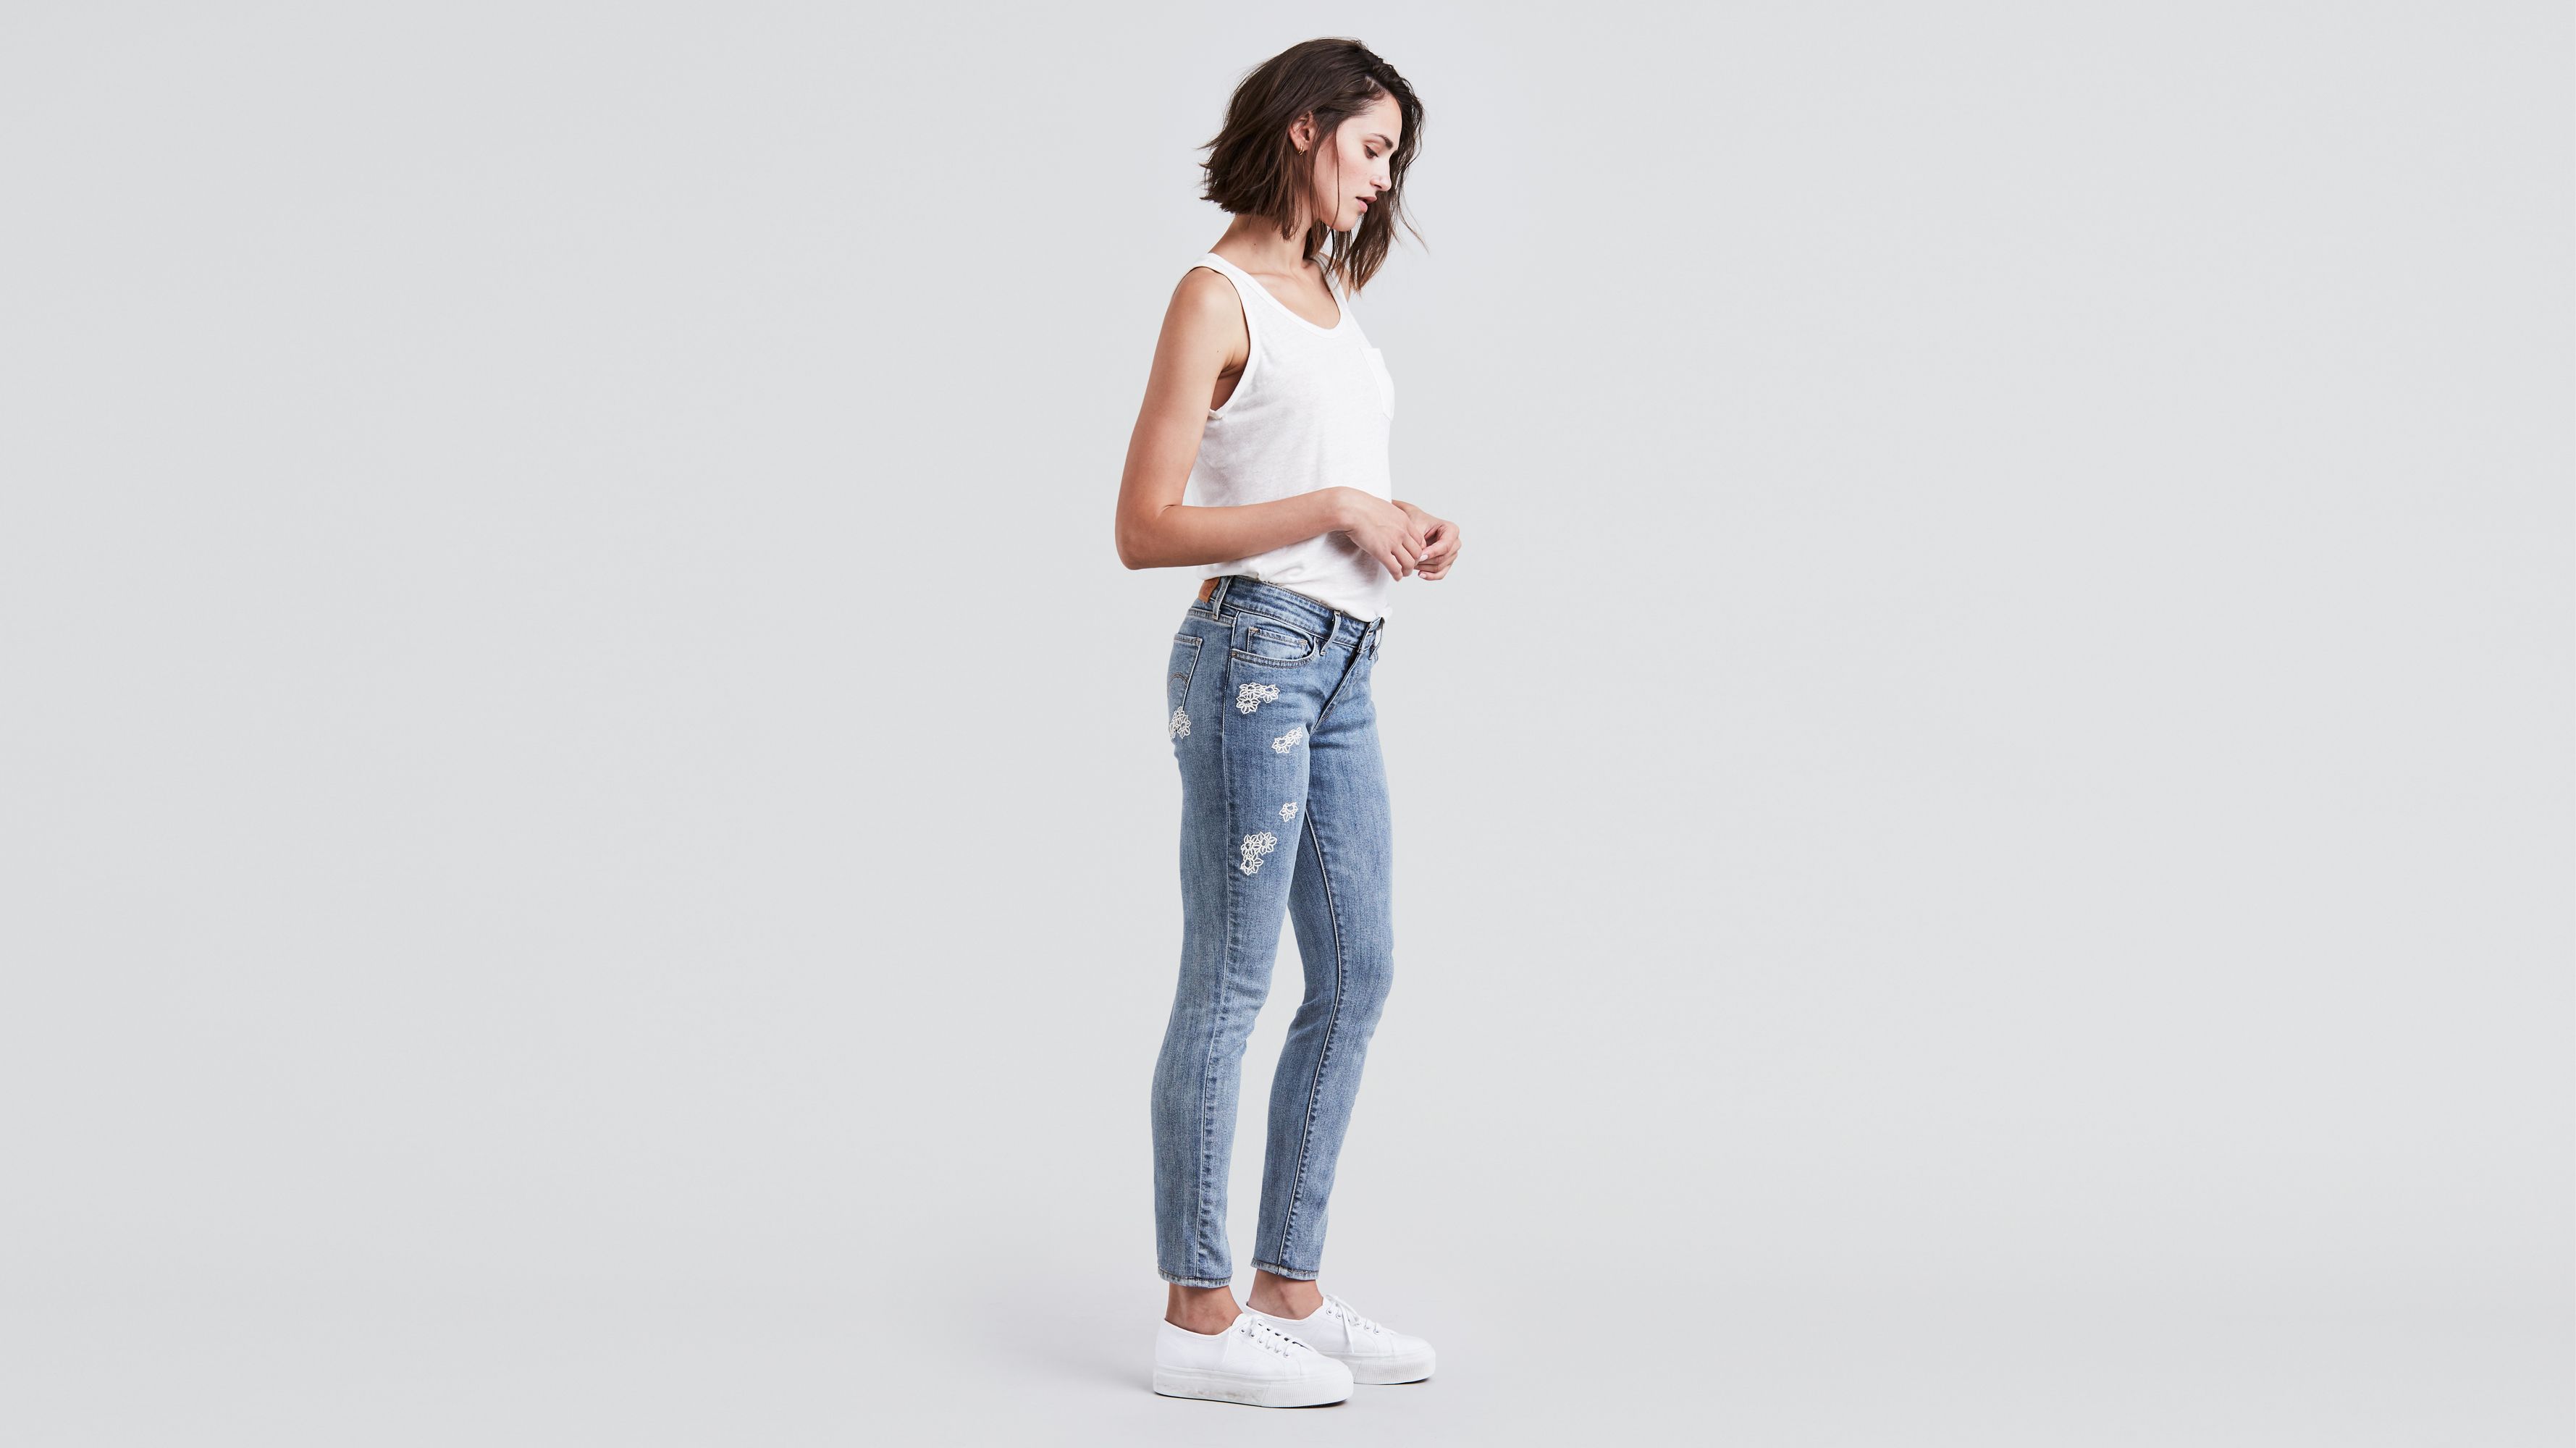 levi's embroidered jeans